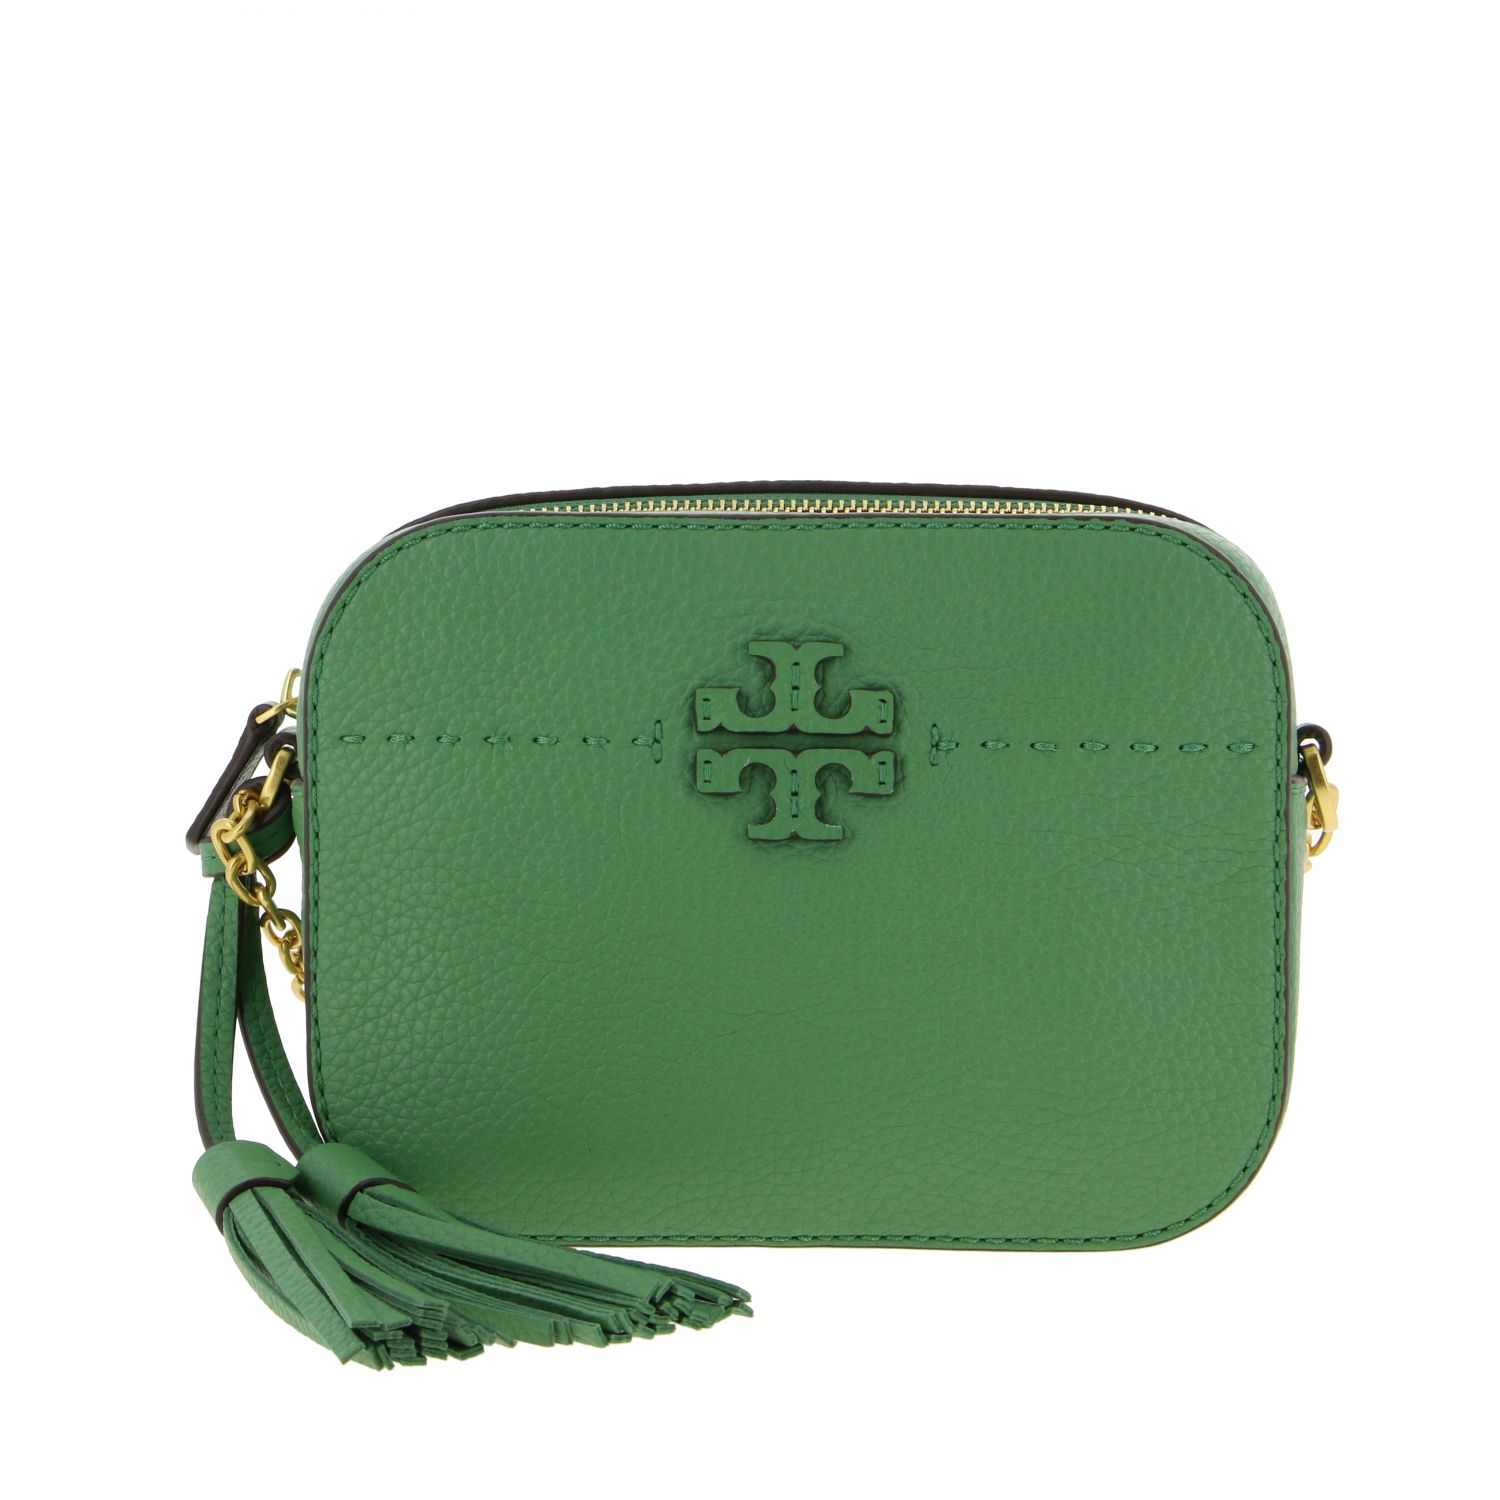 TORY BURCH: shoulder bag in textured leather with emblem - Mint | Tory ...